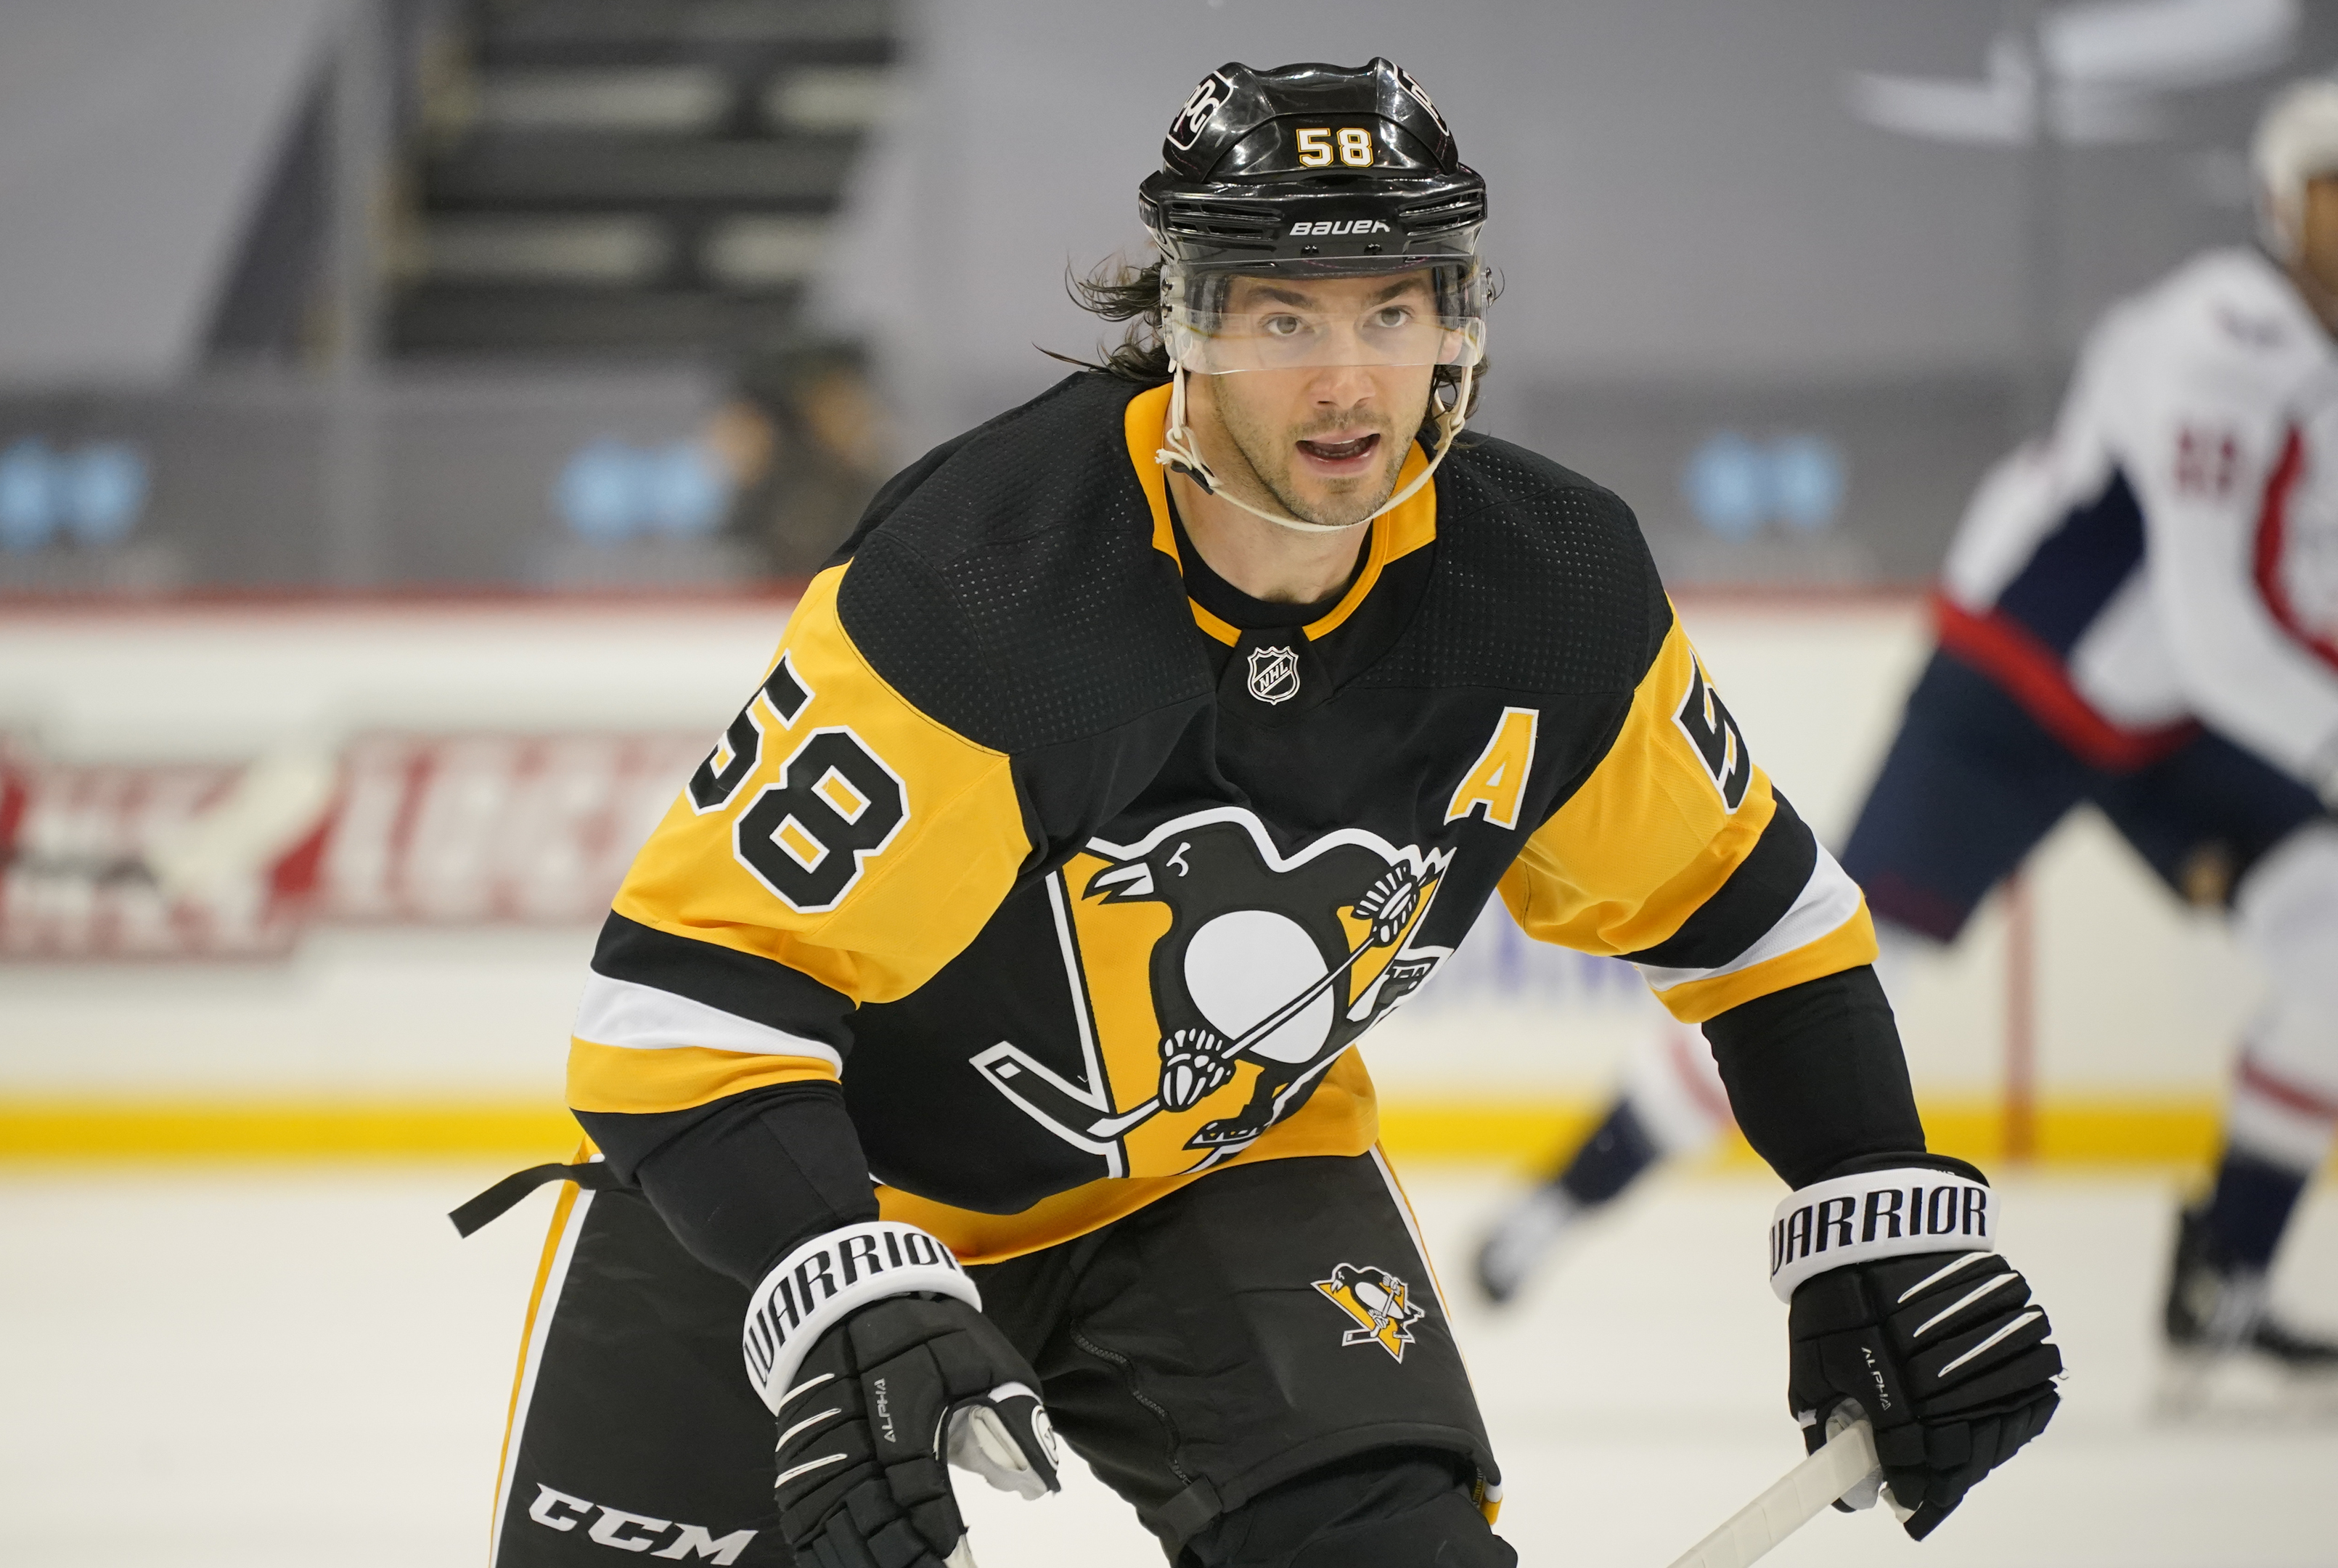 NHL How to LIVE STREAM FREE the New York Islanders at Pittsburgh Penguins Thursday (2-18-21)